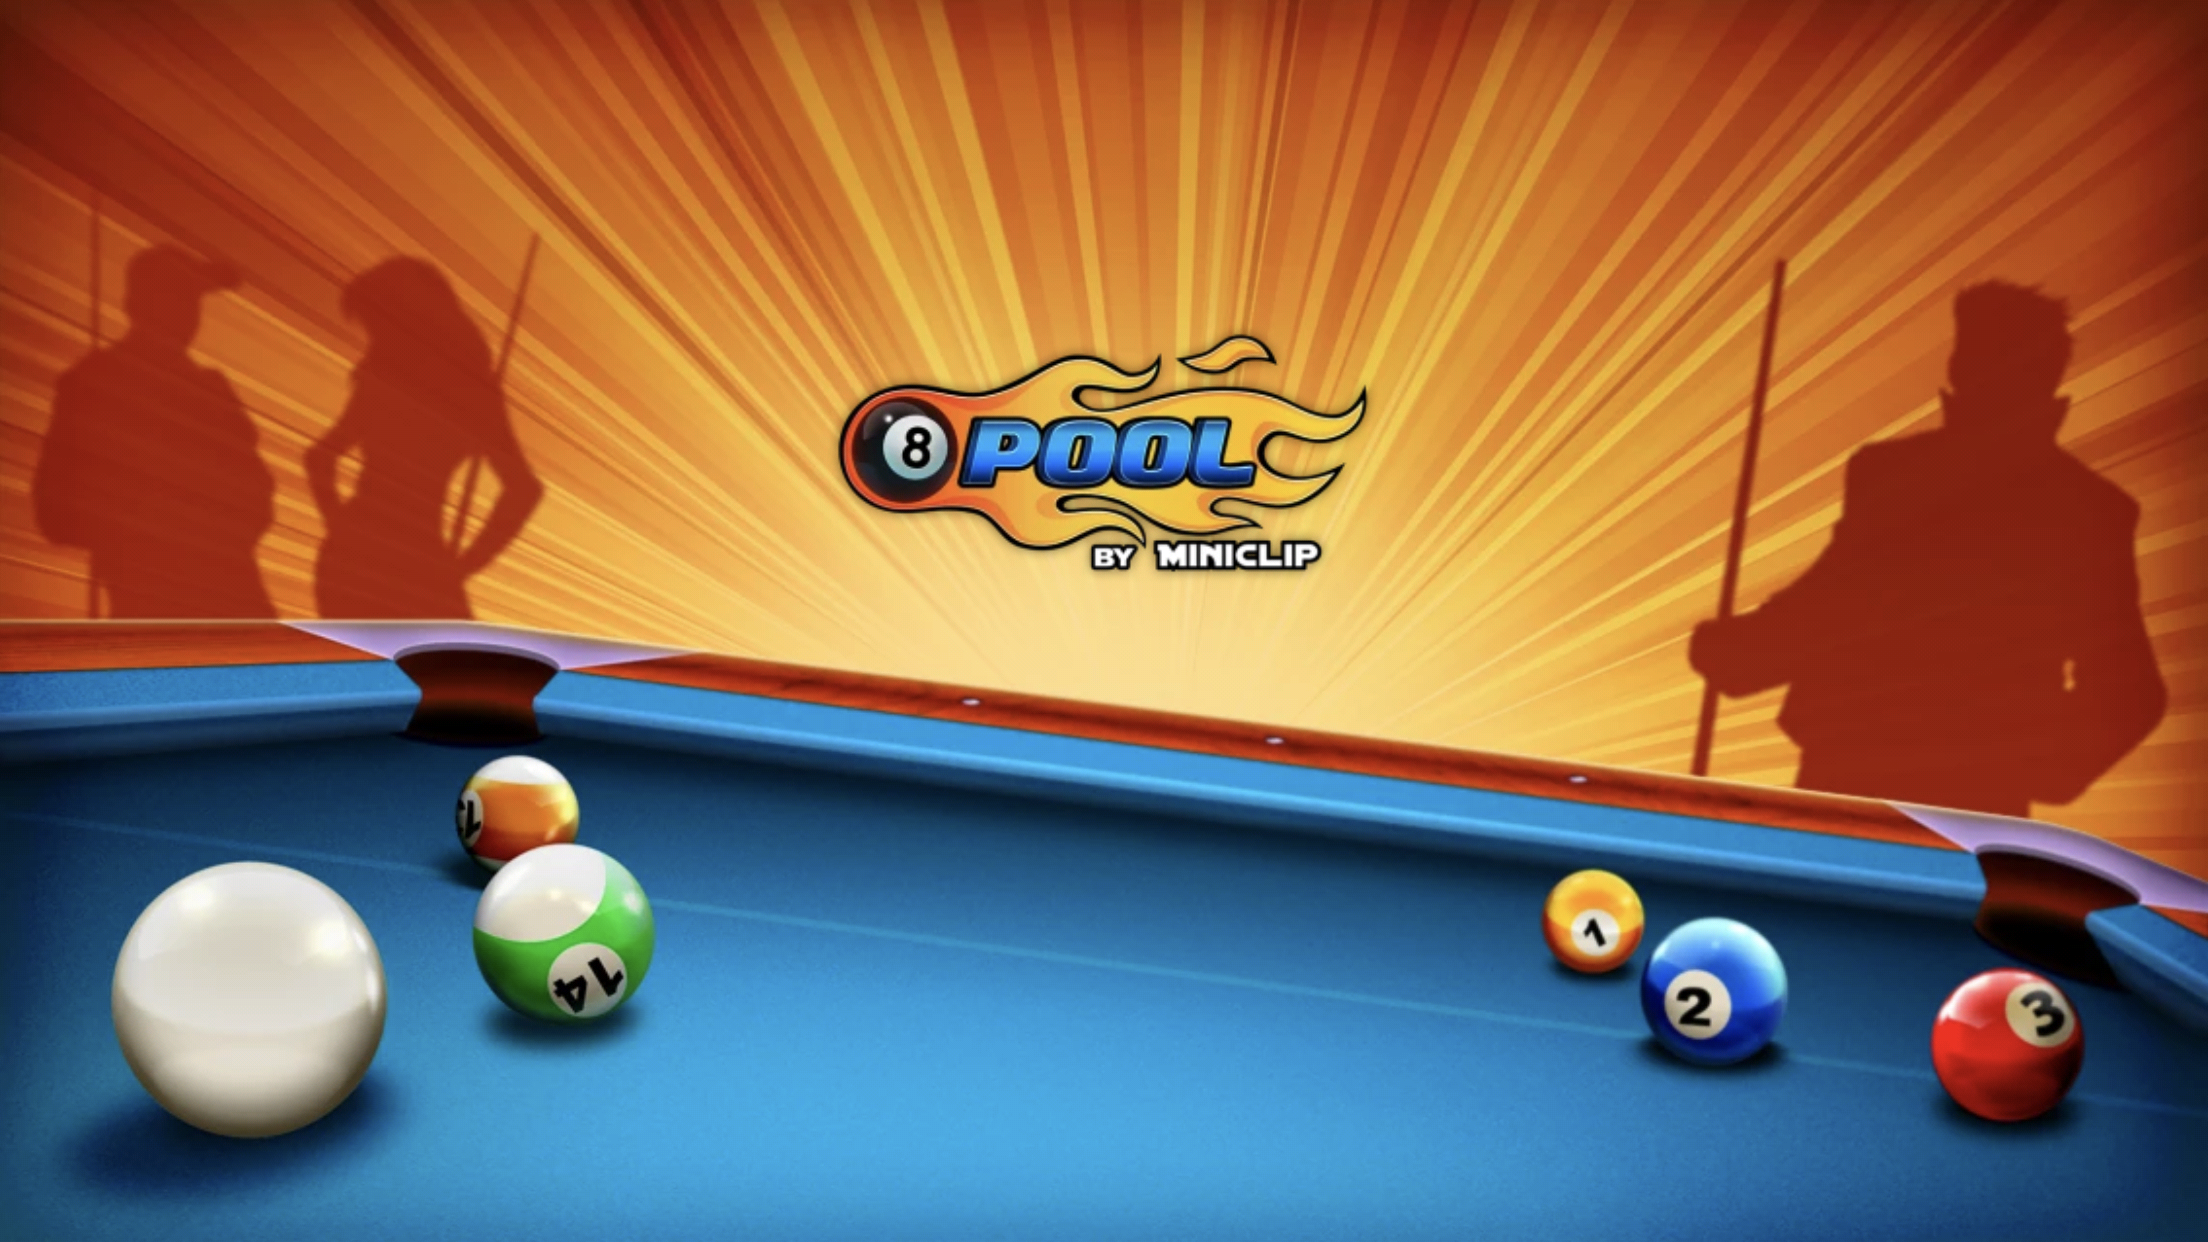 pool games online free play 8 ball